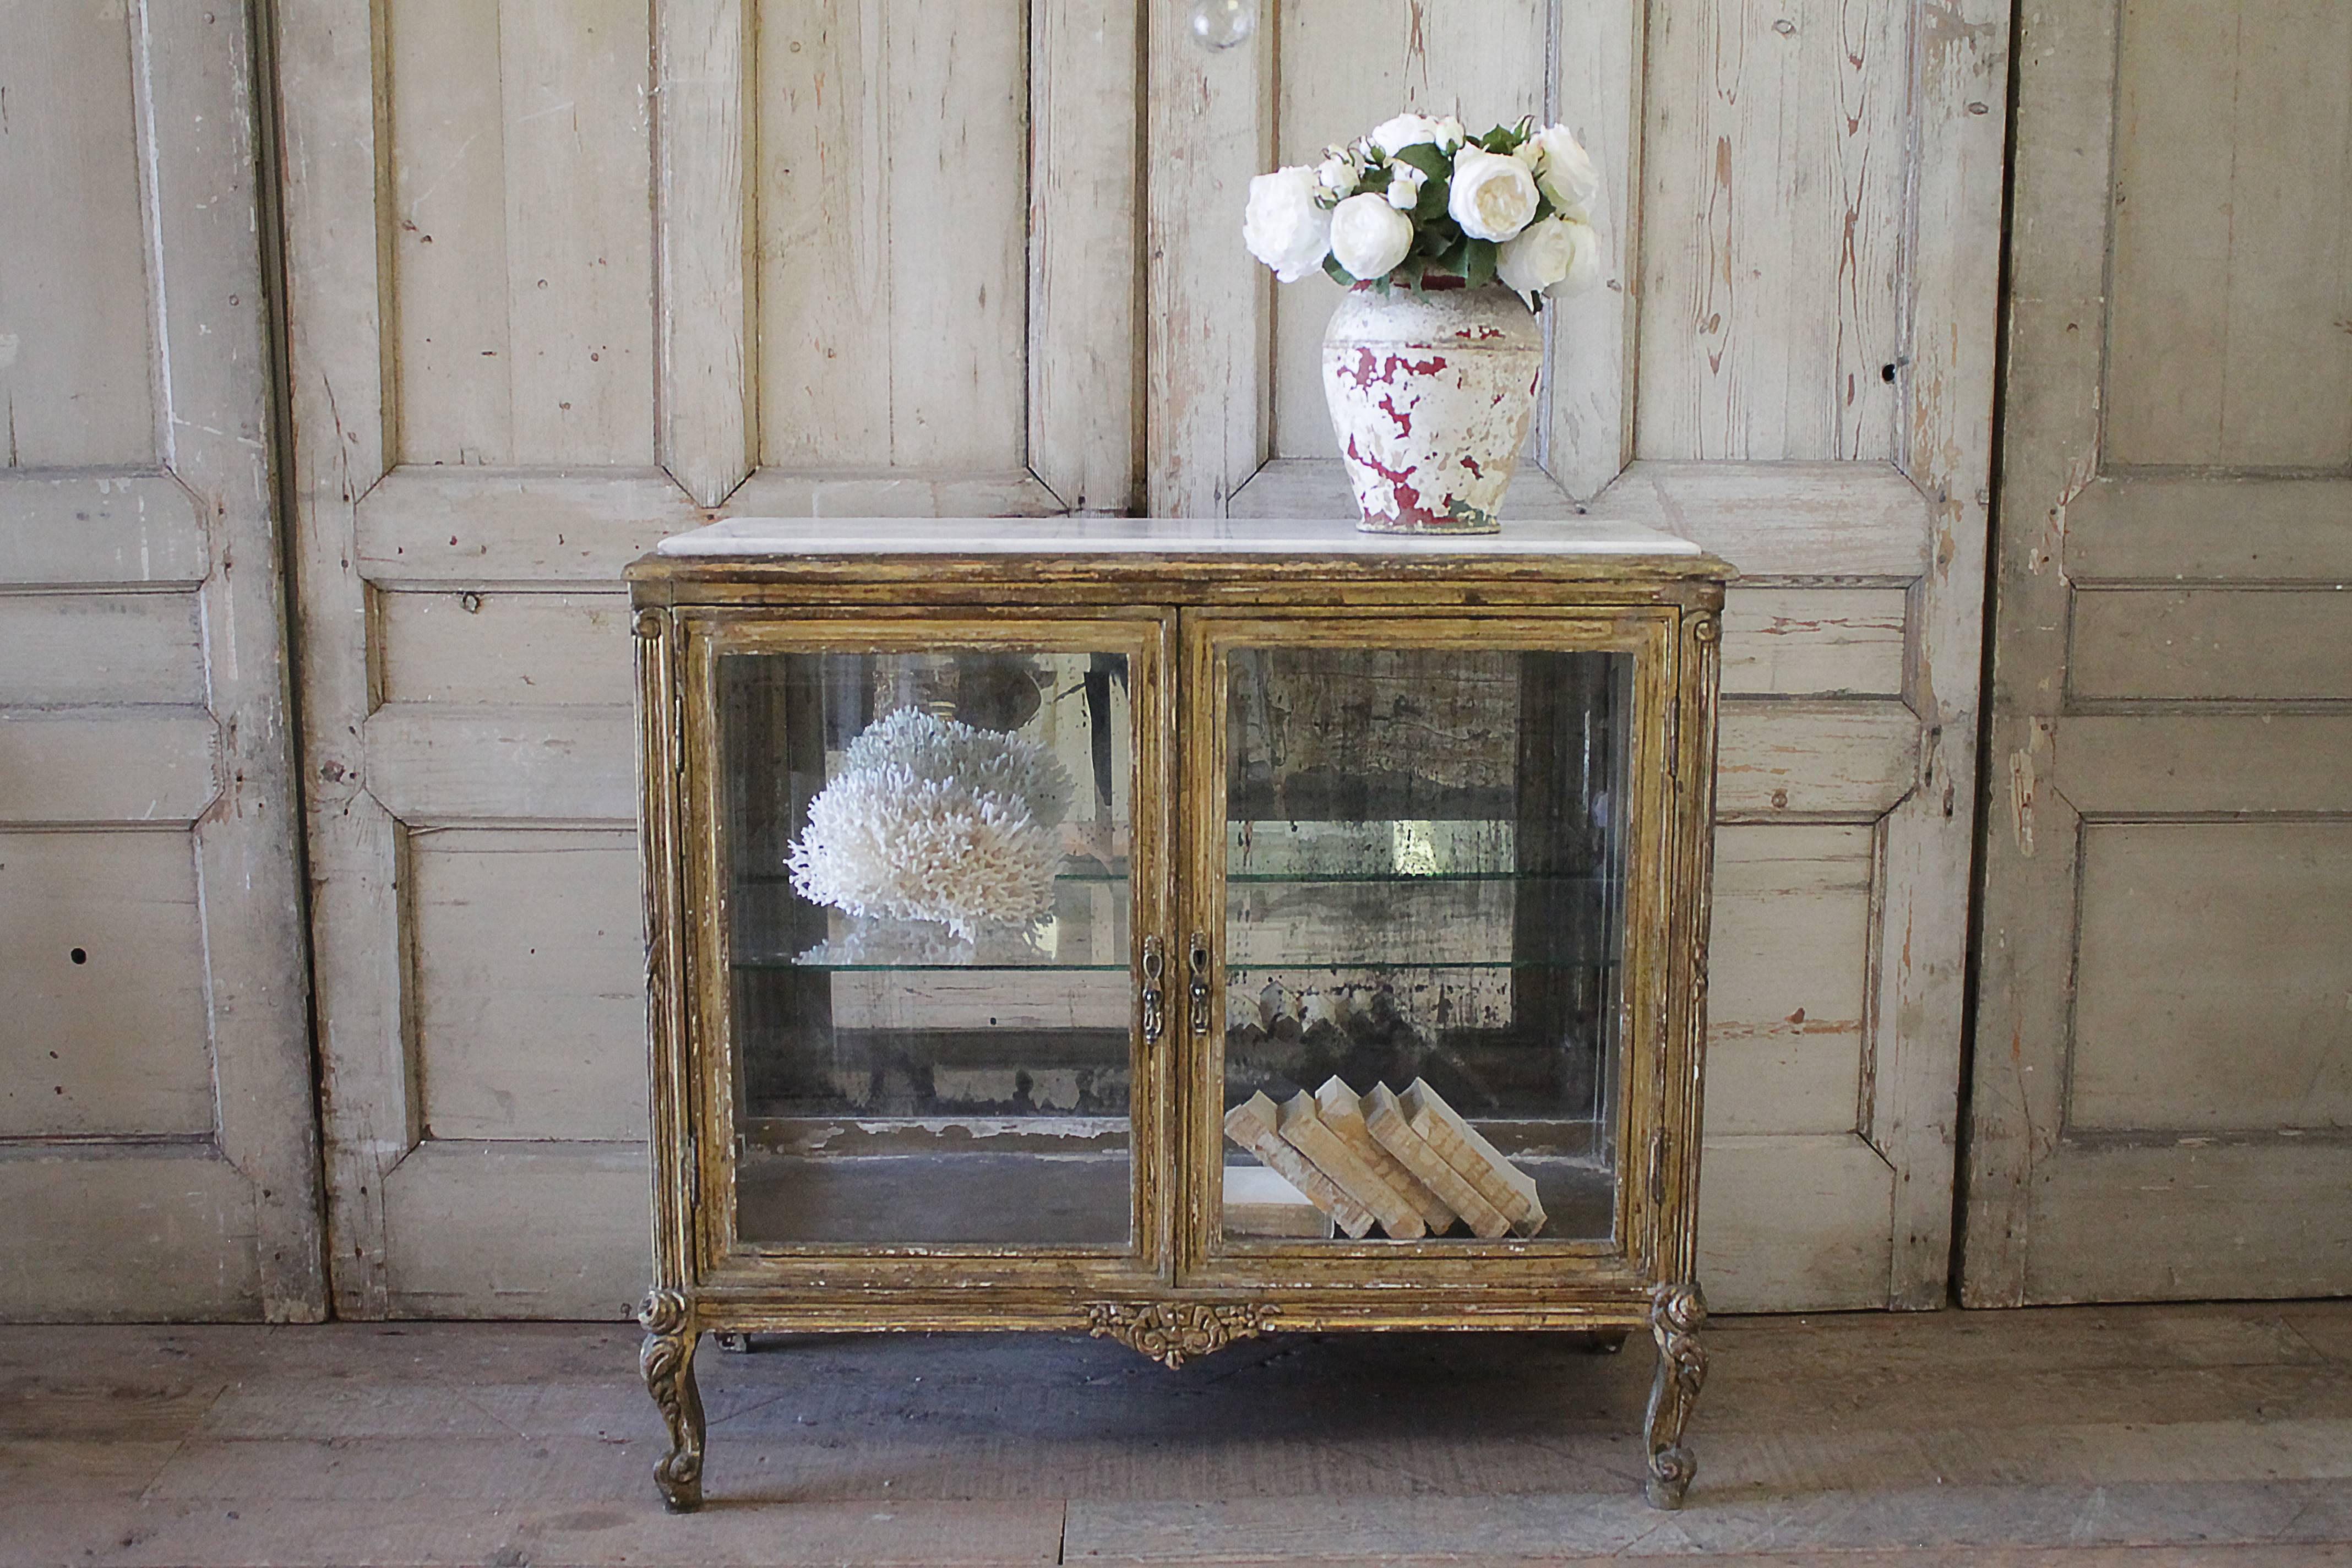 Beautiful French Louis XV Style display cabinet with white marble top. The inside has one glass shelf, and original antique mirror back. The glass on the fronts and sides are all original and have a wavy finish. Curved legs with rosette carved tops.